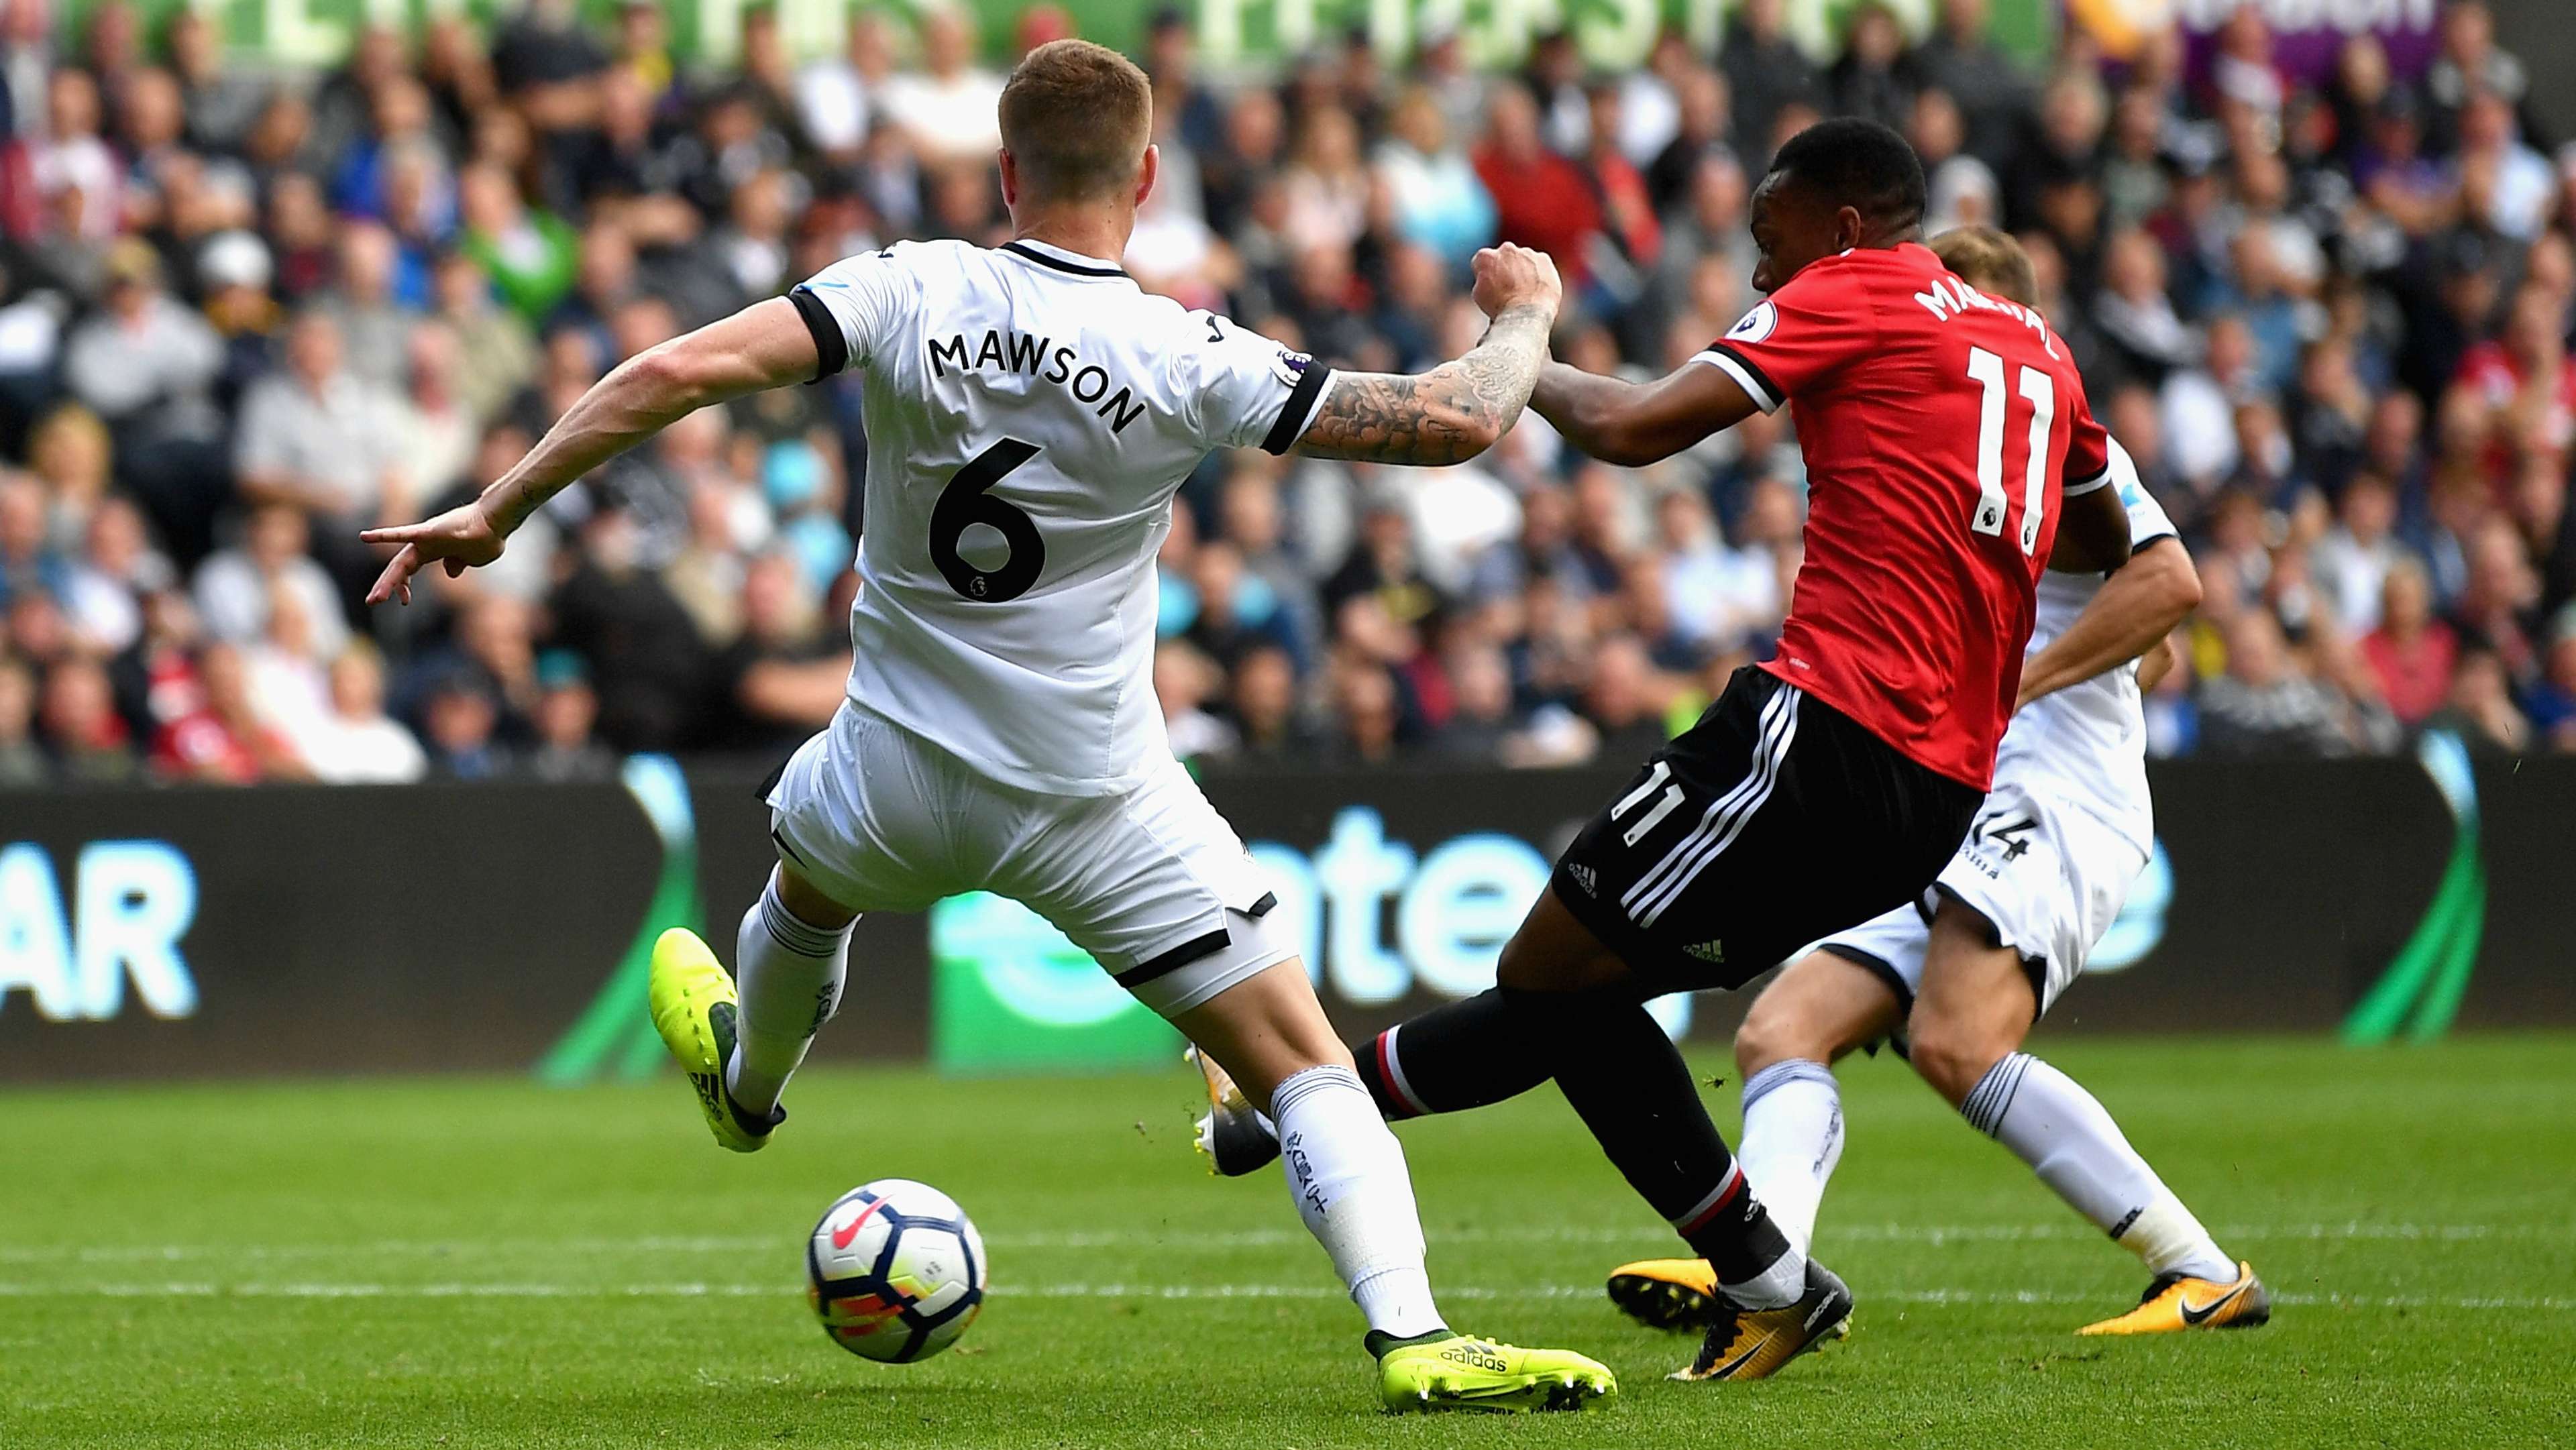 manchester united swansea city 19082017